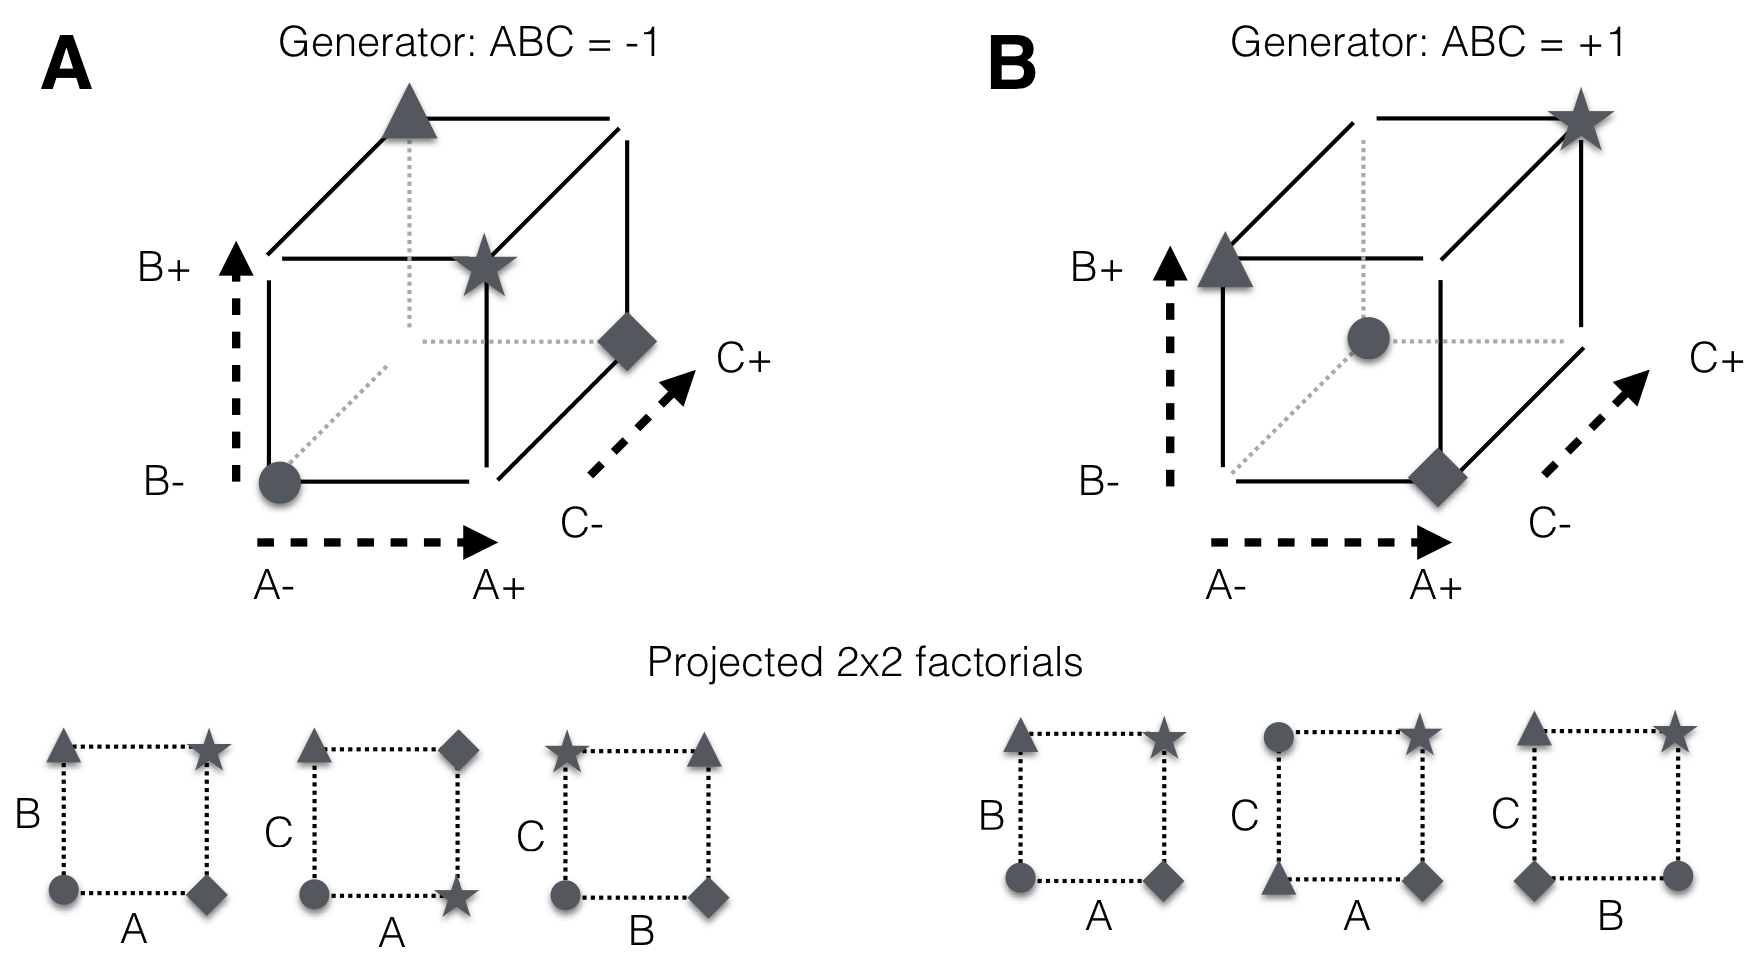 The two half-replicates of a $2^3$-factorial with three-way interaction and grand mean confounded. Any projection of the design to two factors yields a full $2^2$-factorial design and main effects are confounded with two-way interactions. A: Design based on low level of three-way interaction; B: Complementary design based on high level.